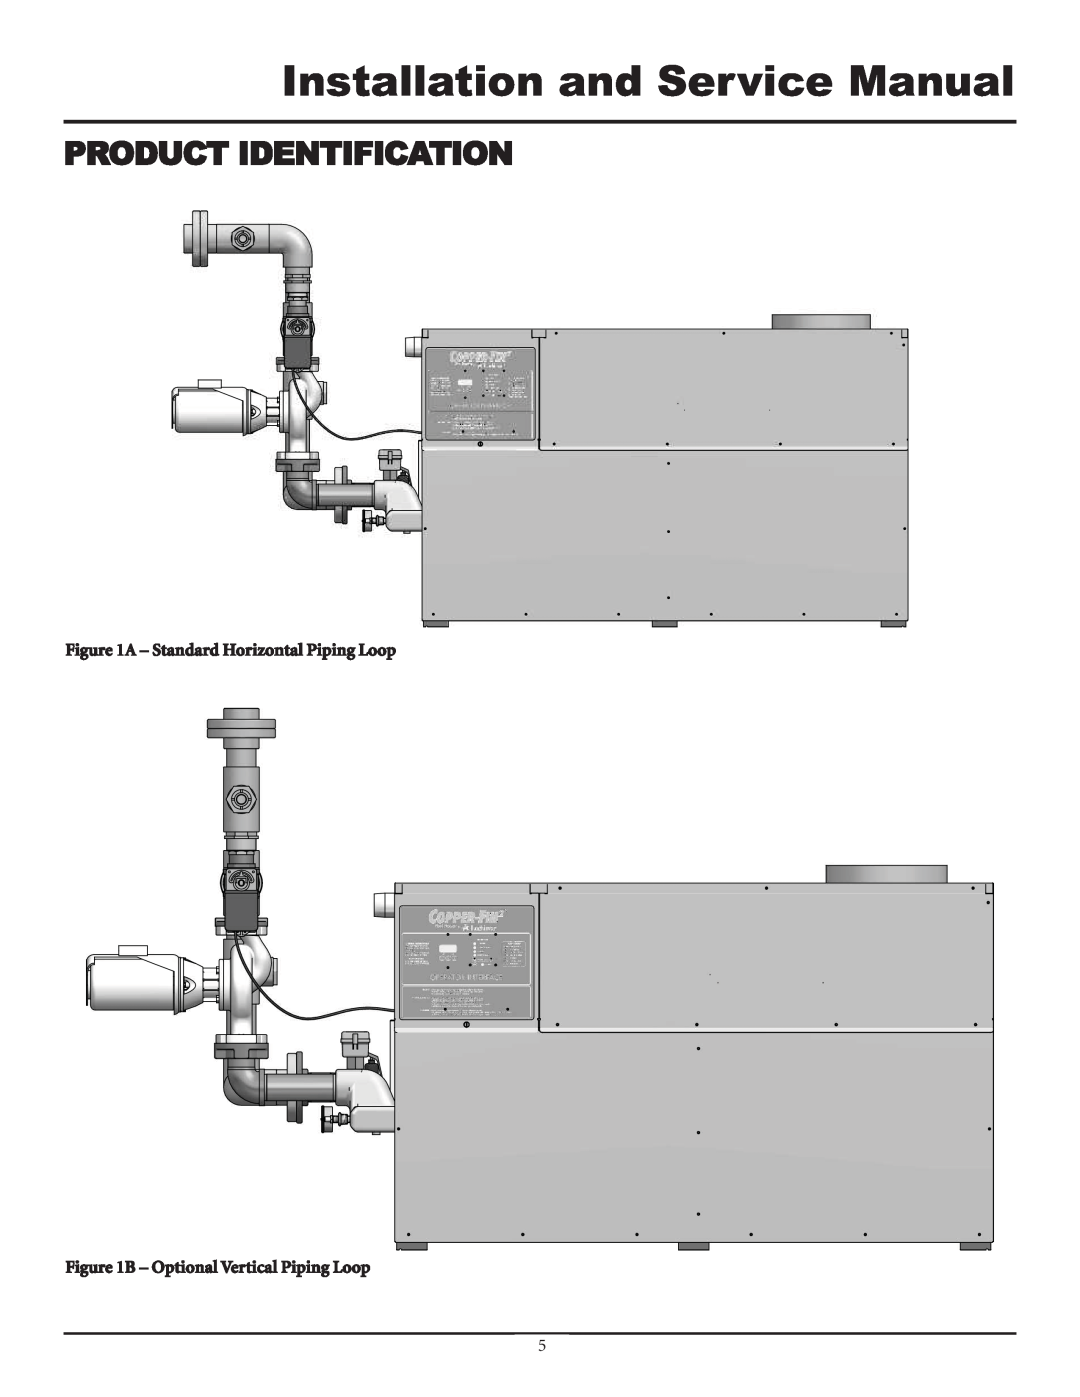 Lochinvar F0600187510 Product Identification, Installation and Service Manual, A – Standard Horizontal Piping Loop 